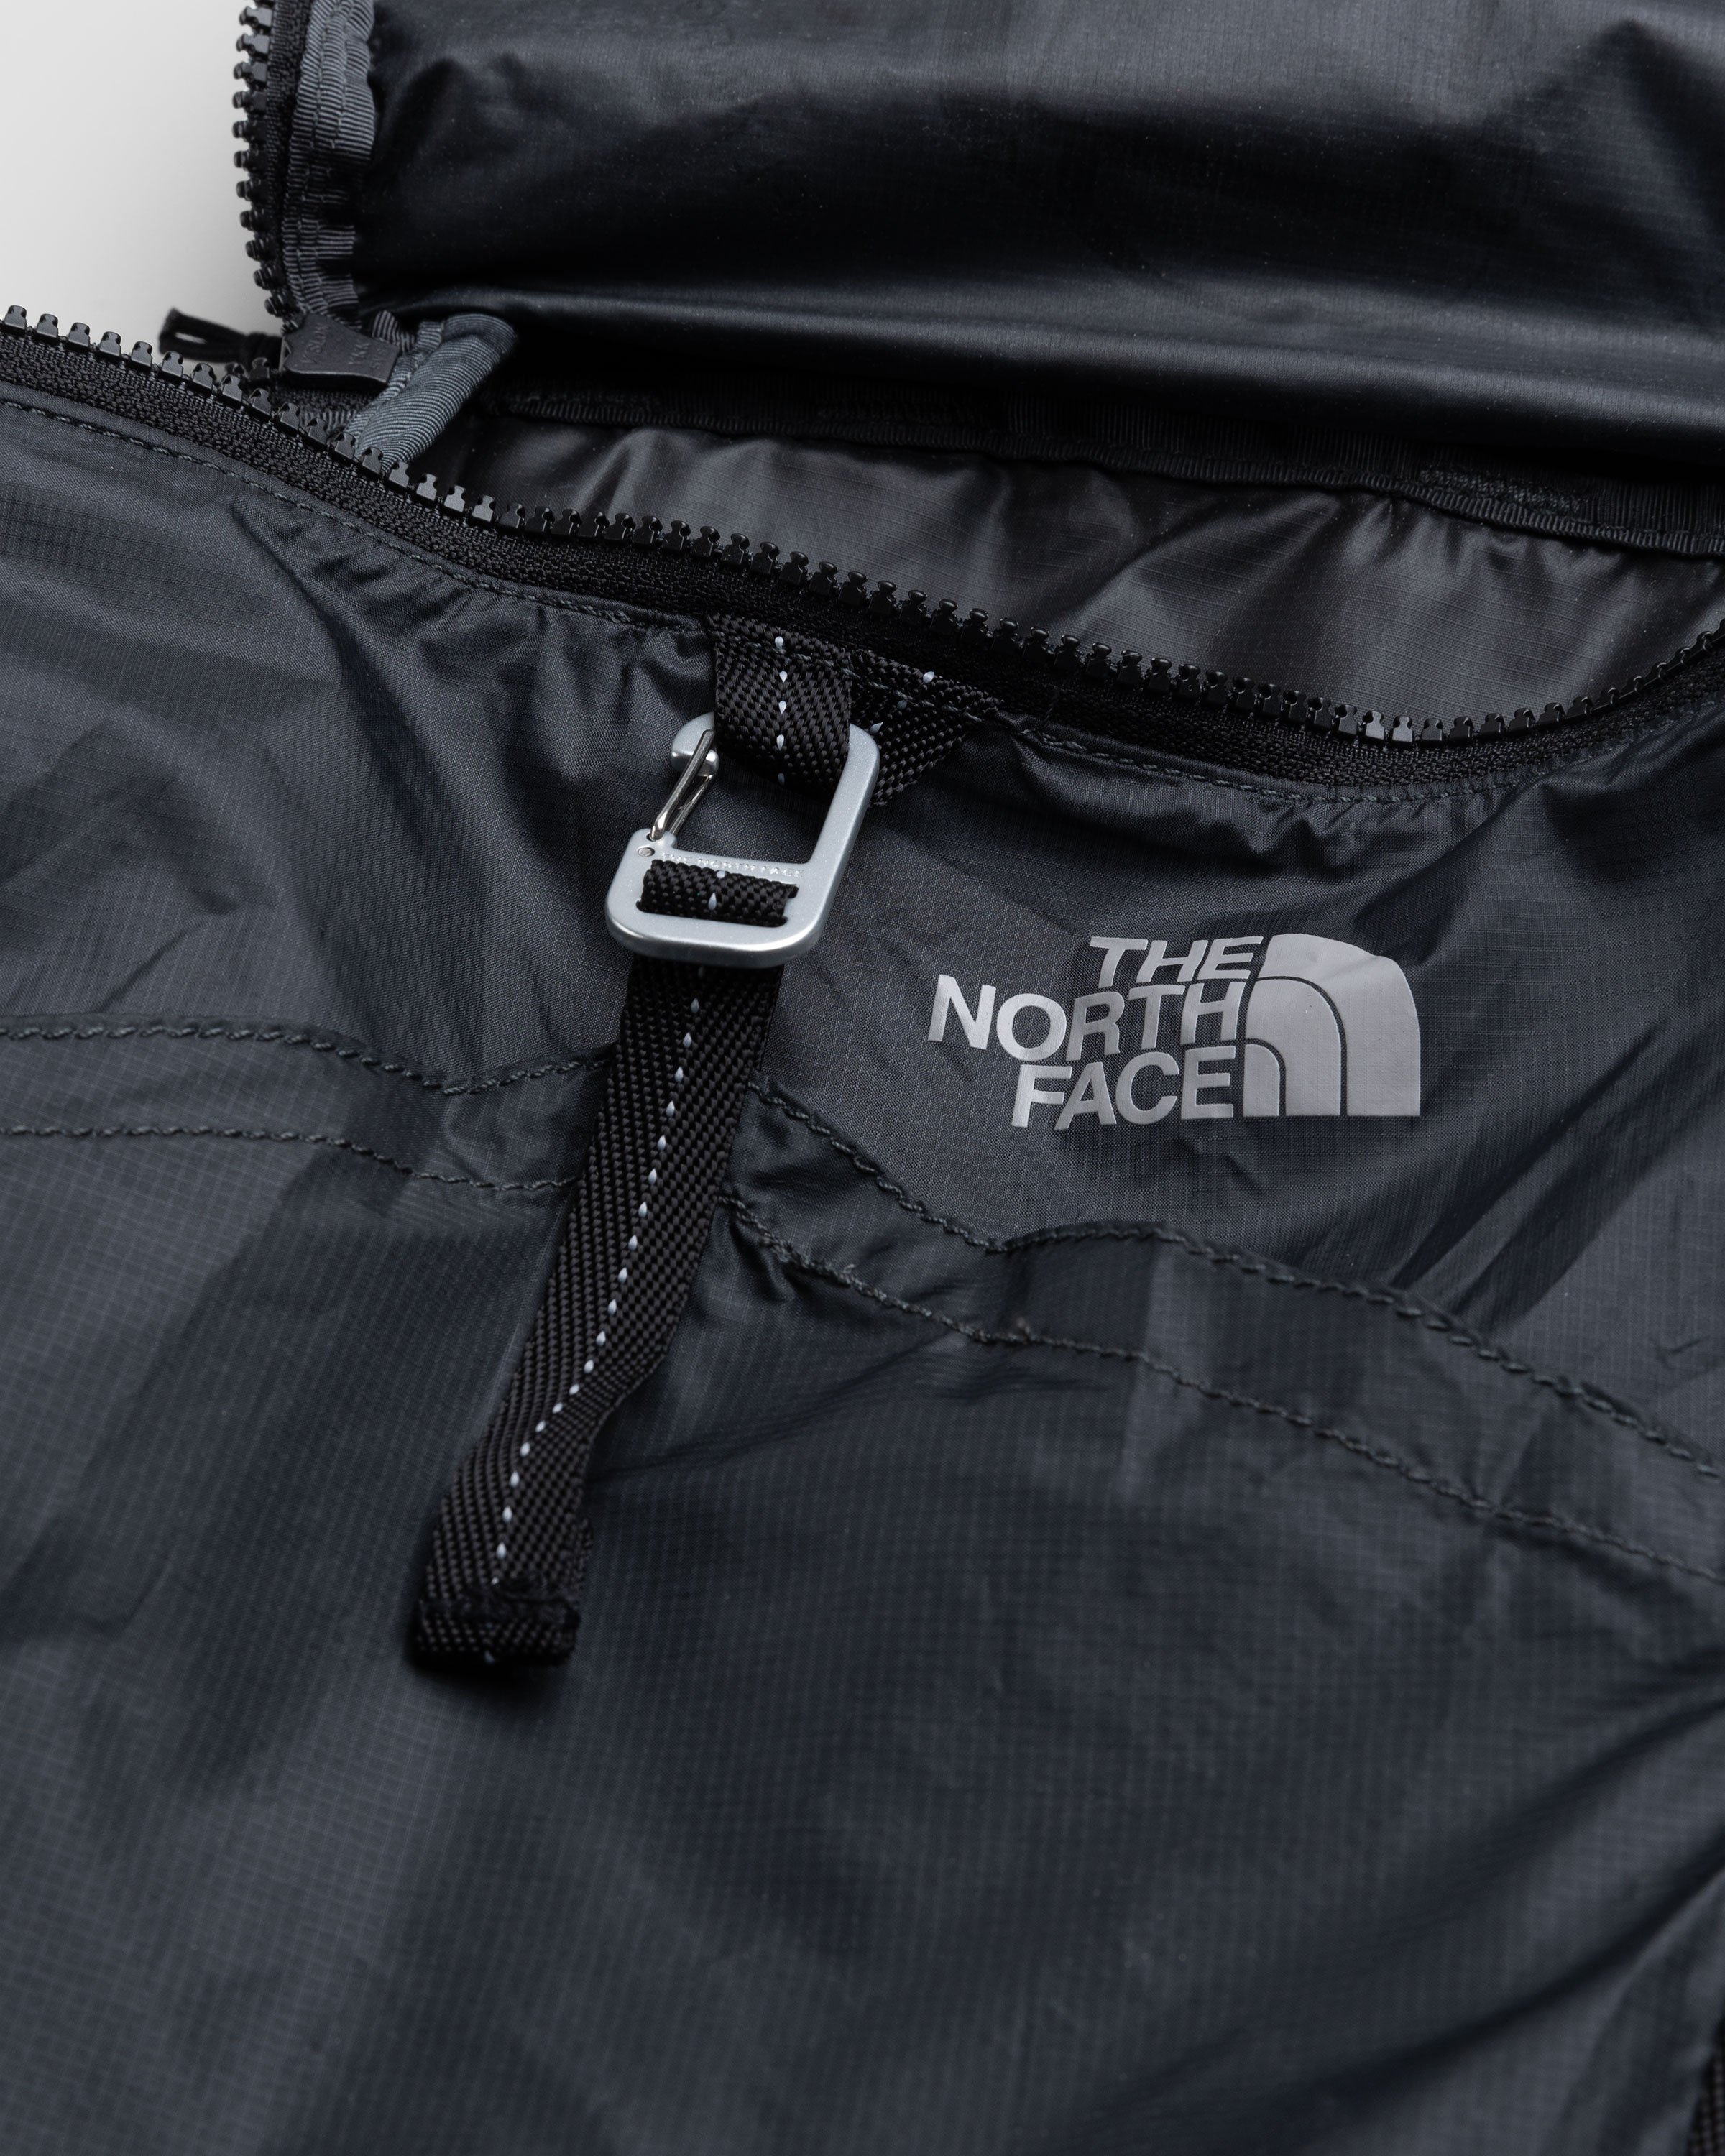 The North Face - Flyweight Daypack Asphalt Grey/TNF Black - Accessories - Grey - Image 4